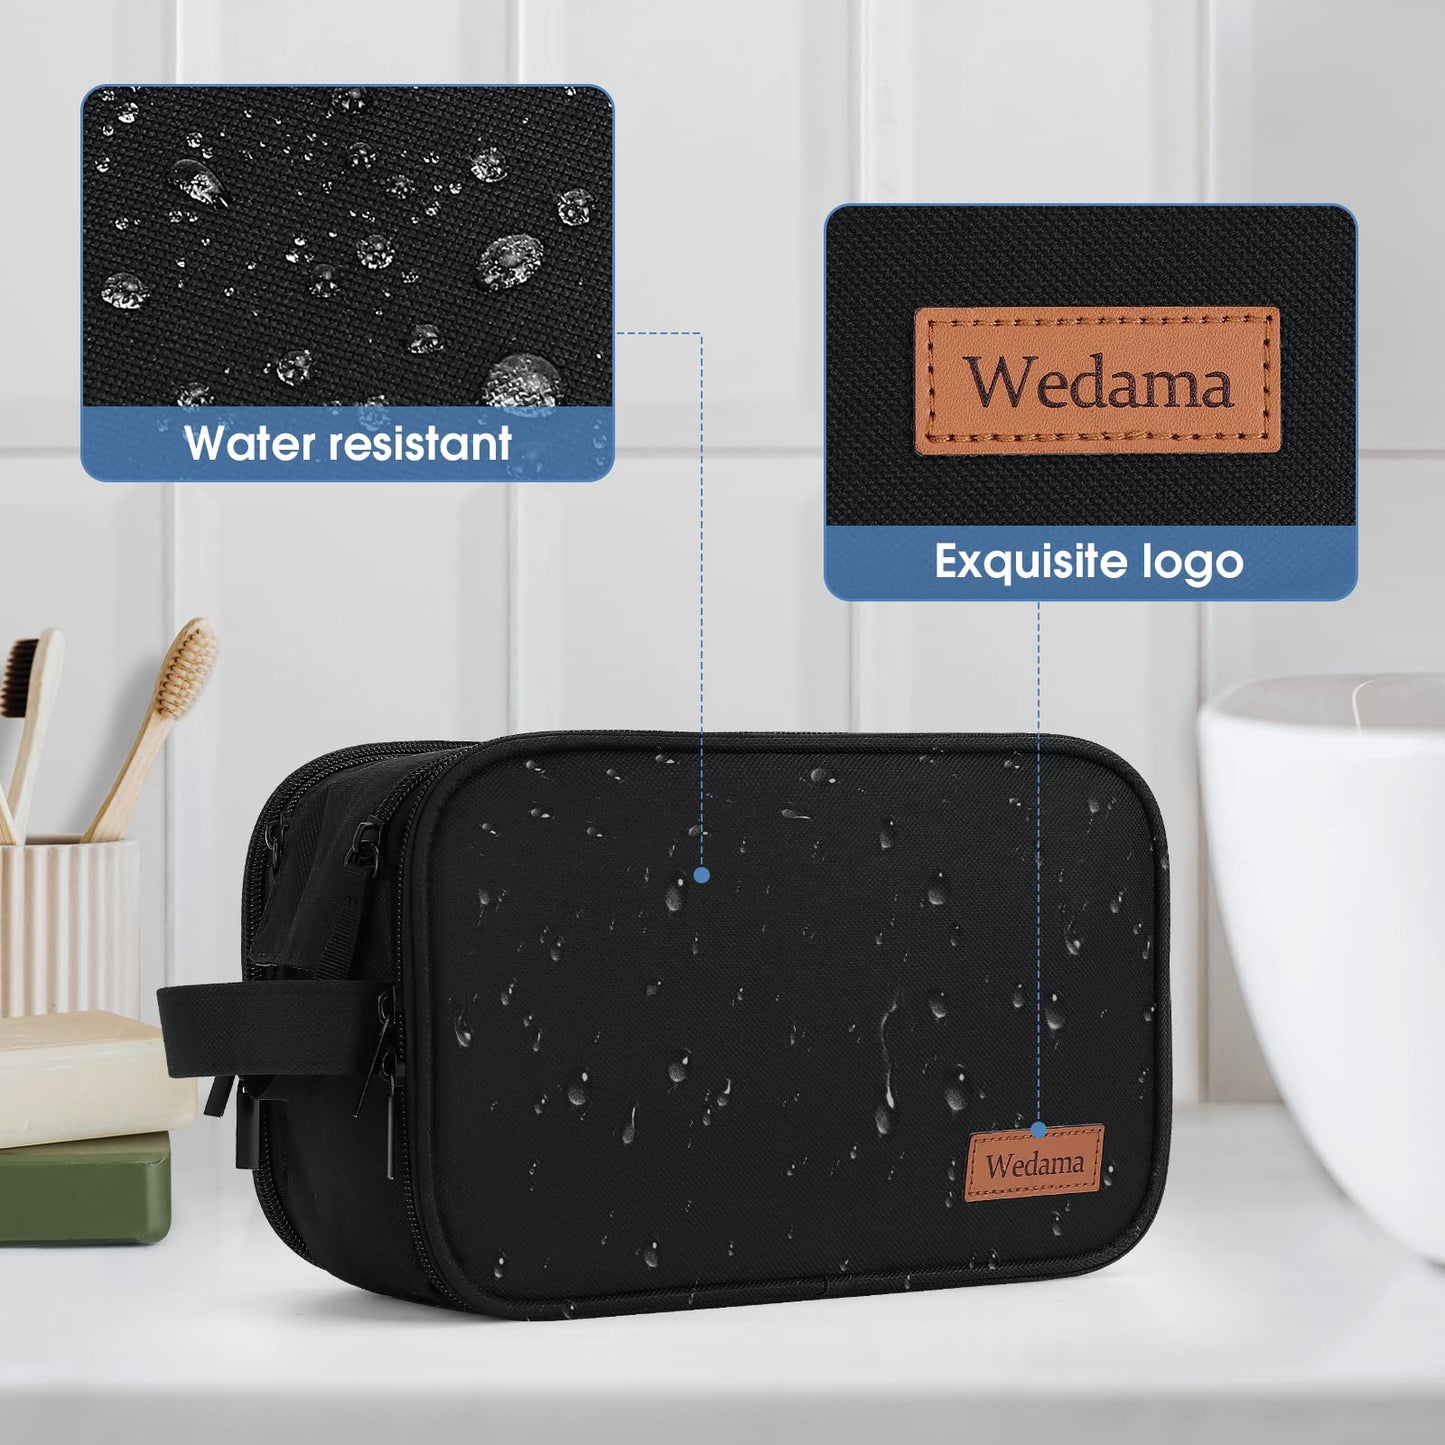 Wedama Toiletry Bag for Men, Handheld Travel Toiletry Bag, Waterproof Travel Bag for Toiletries, Thickened Polyester Travel Dopp Kit, Toiletries Bag for Travel Business Trips and Camping, Black